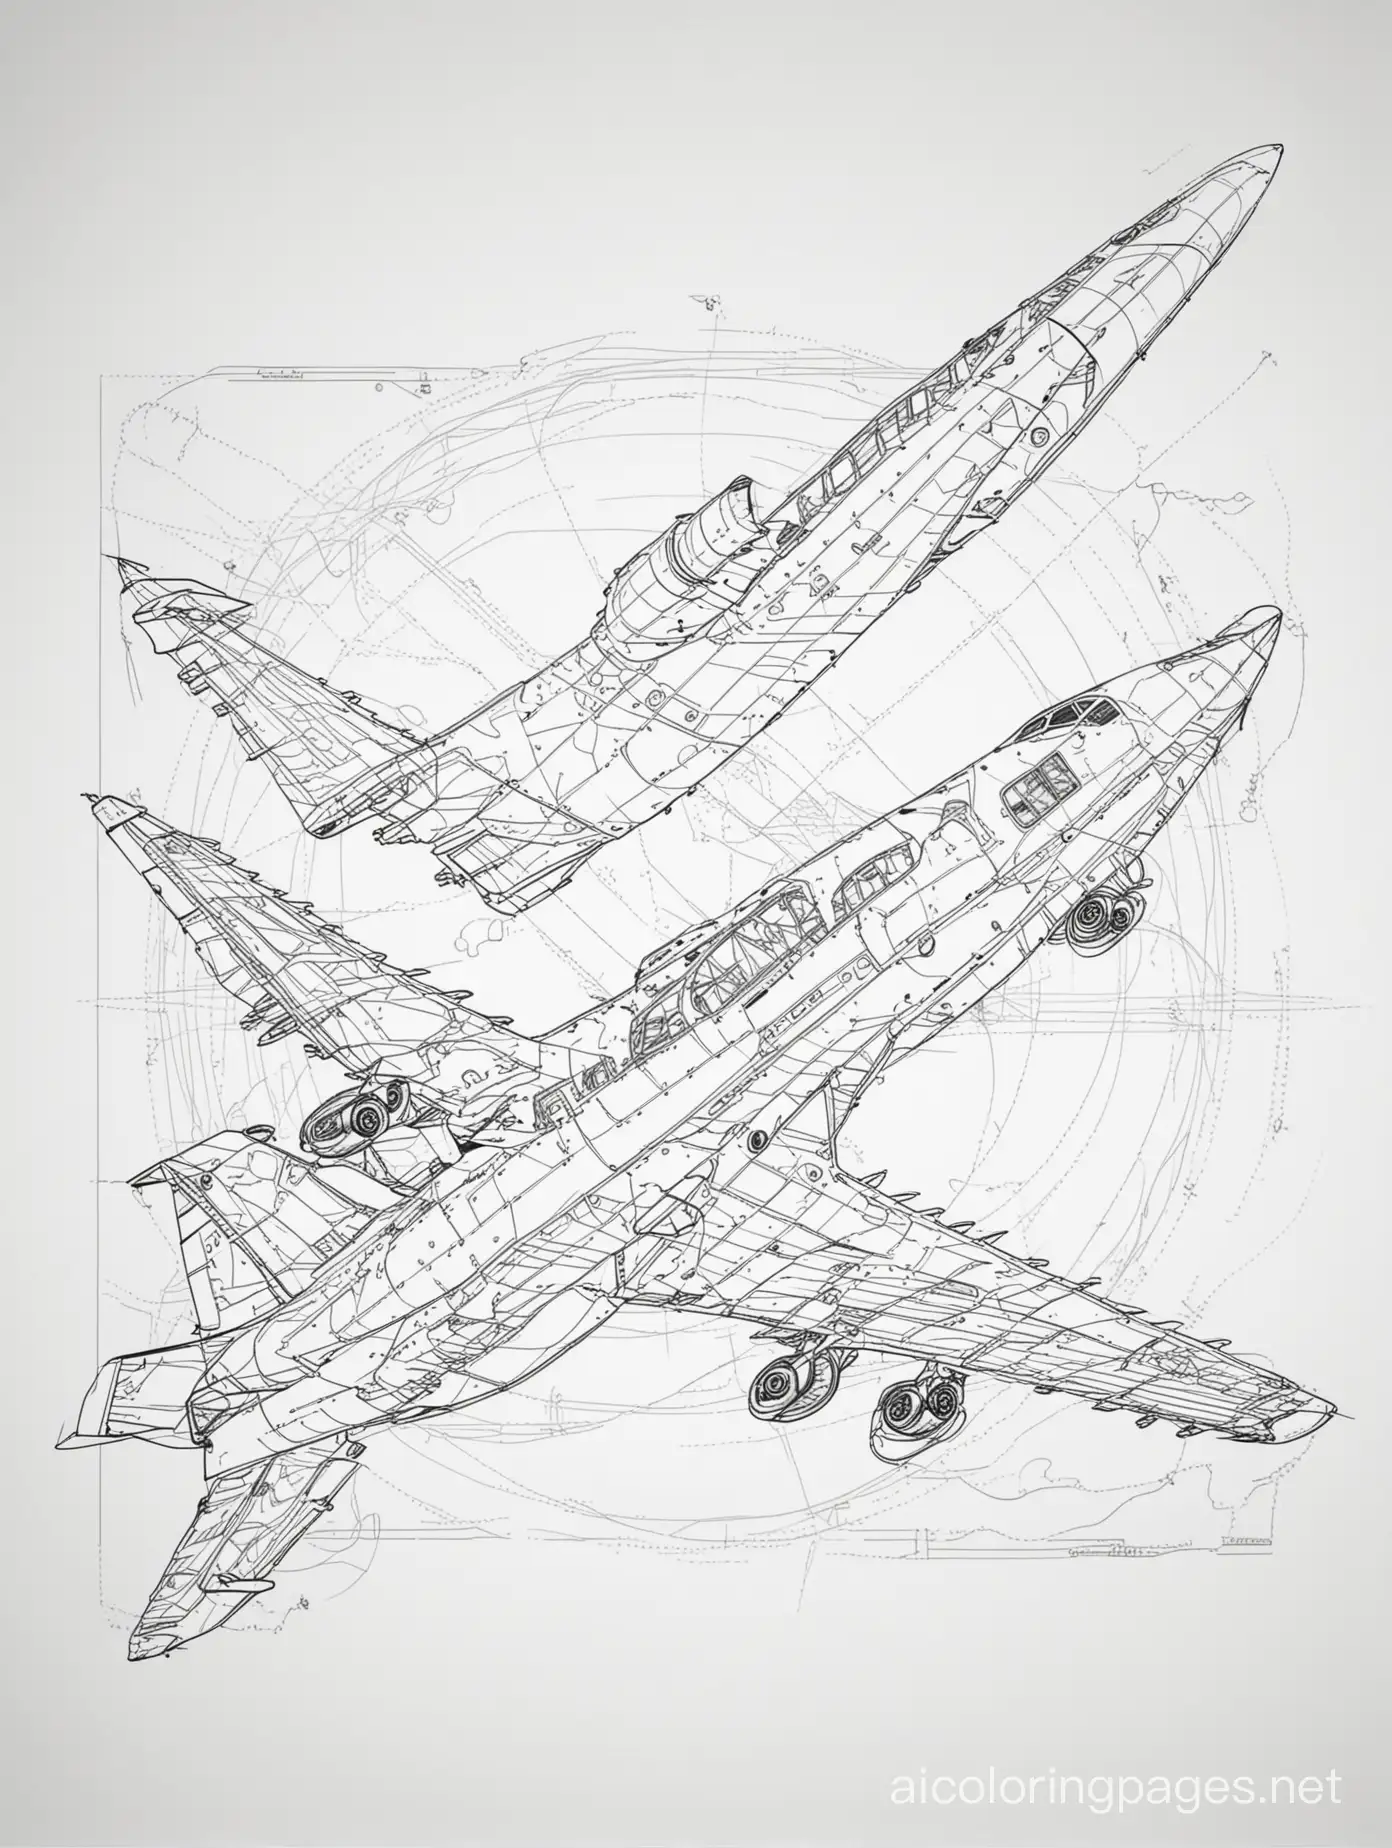 airplane cut through to see the technology and electronics inside, Coloring Page, black and white, line art, white background, Simplicity, Ample White Space. The background of the coloring page is plain white to make it easy for young children to color within the lines. The outlines of all the subjects are easy to distinguish, making it simple for kids to color without too much difficulty